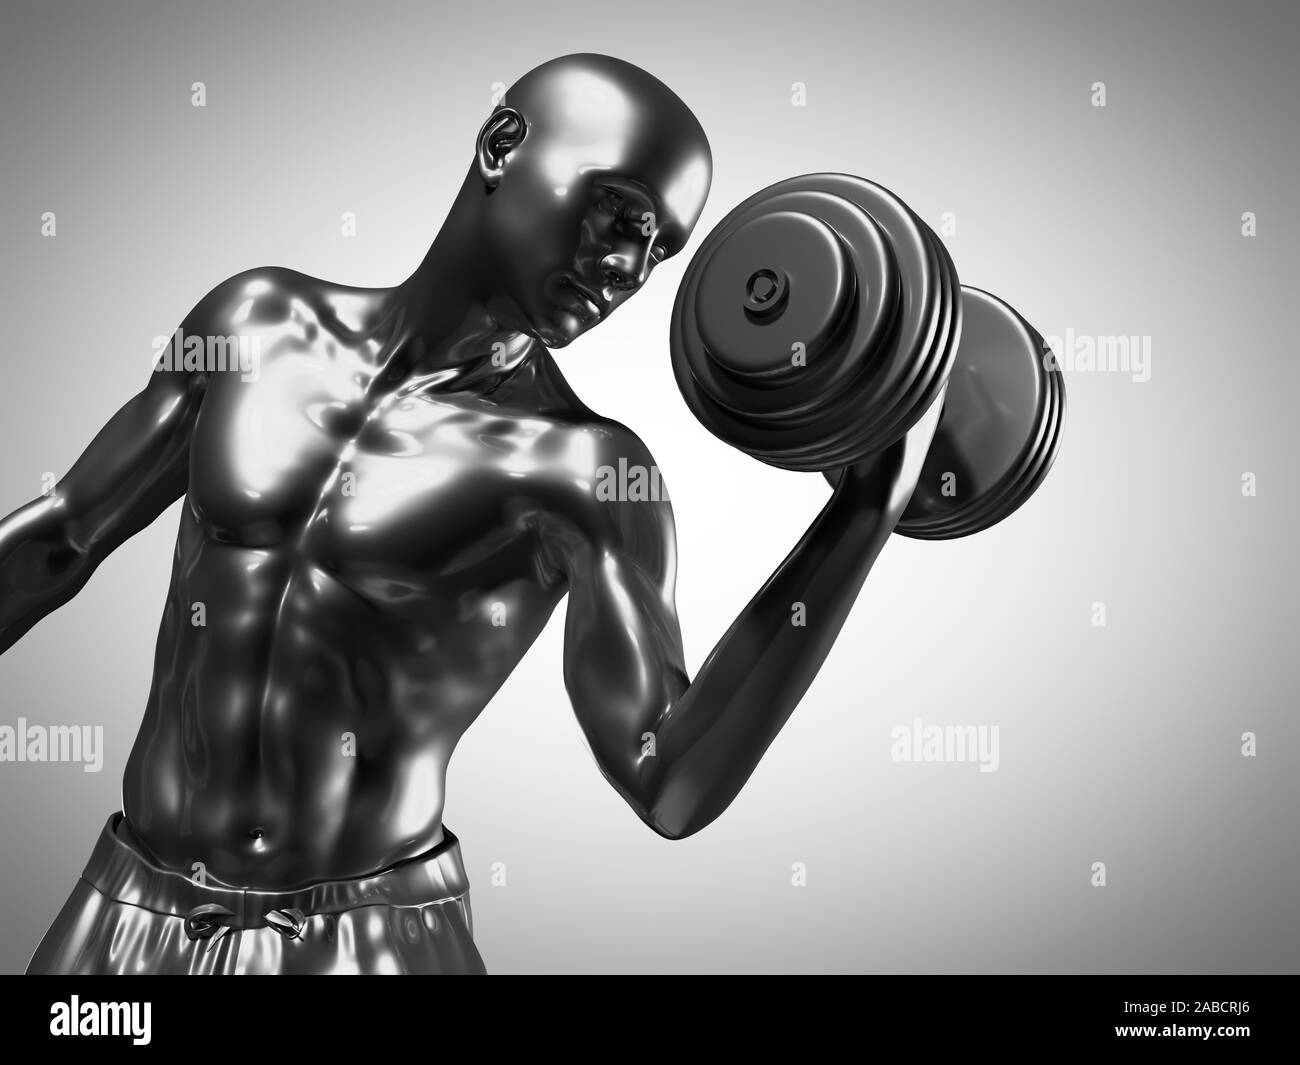 3d rendered medically accurate illustration of a metallic man lifting dumbbells Stock Photo